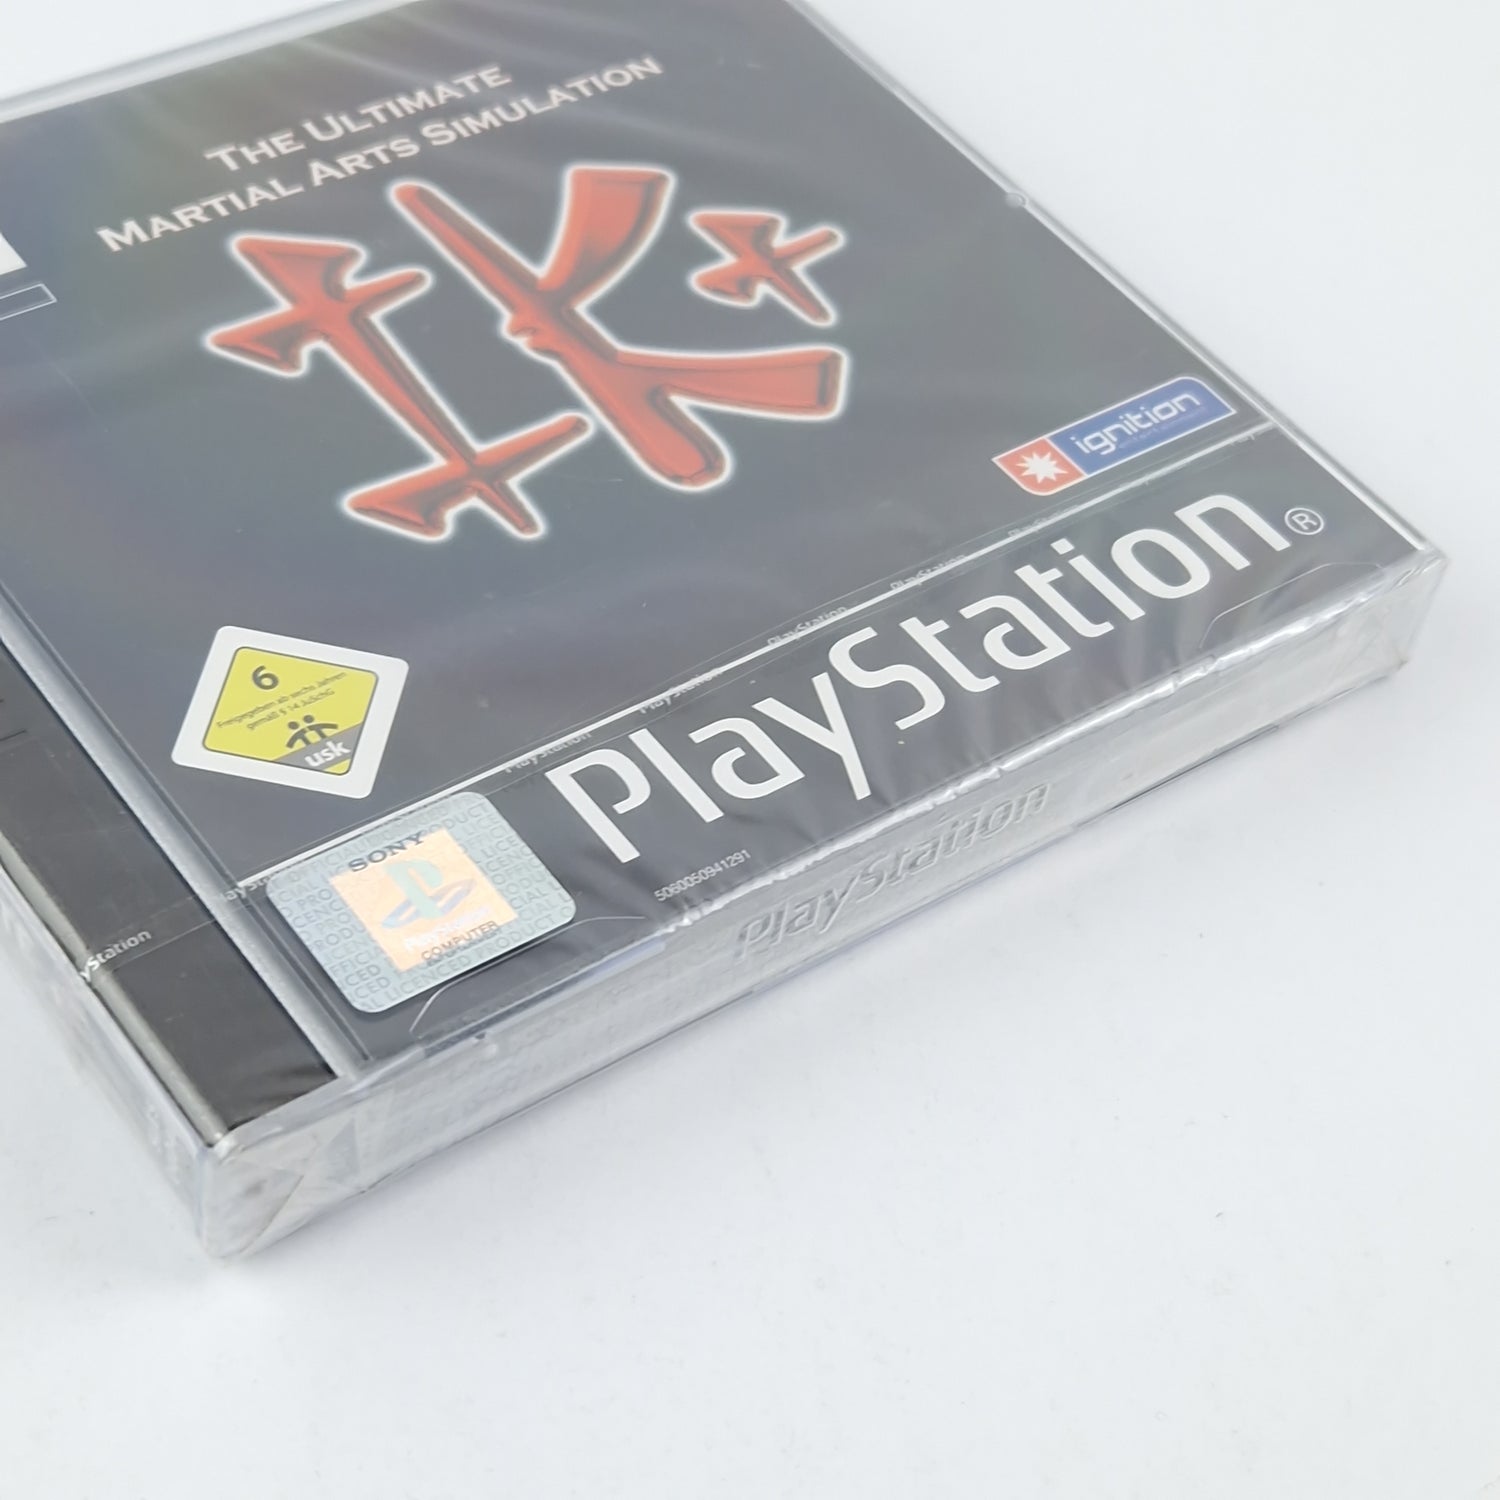 Playstation 1 game: The Ultimate Martial Arts Simulation - OVP NEW SEALED PS1